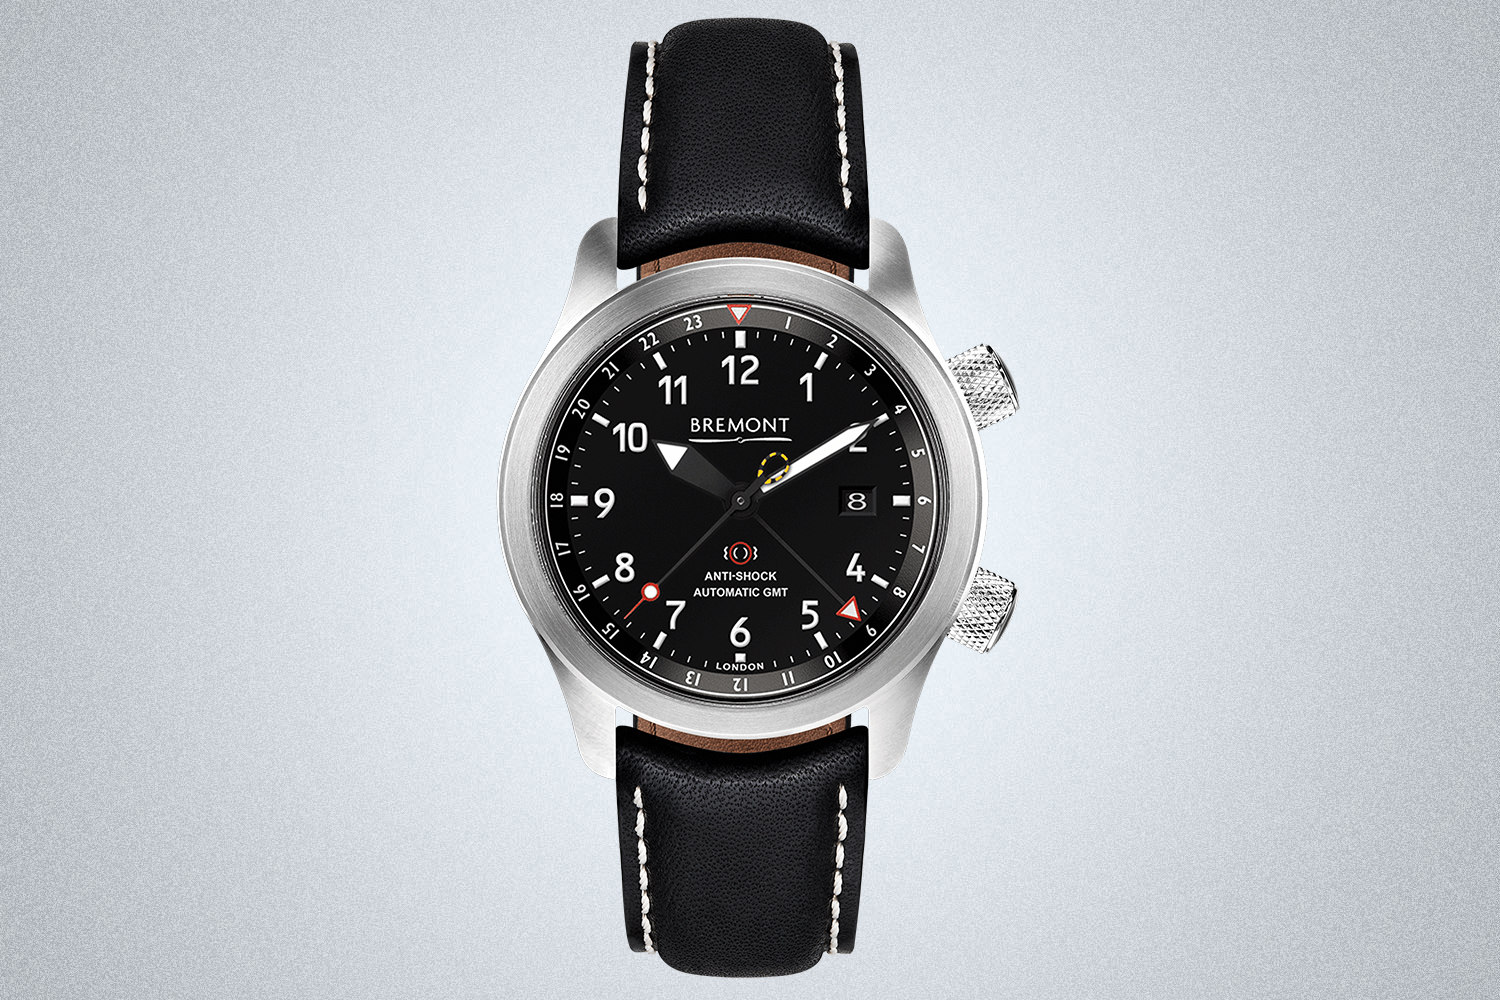 The Bremont MBIII watch in black and bronze